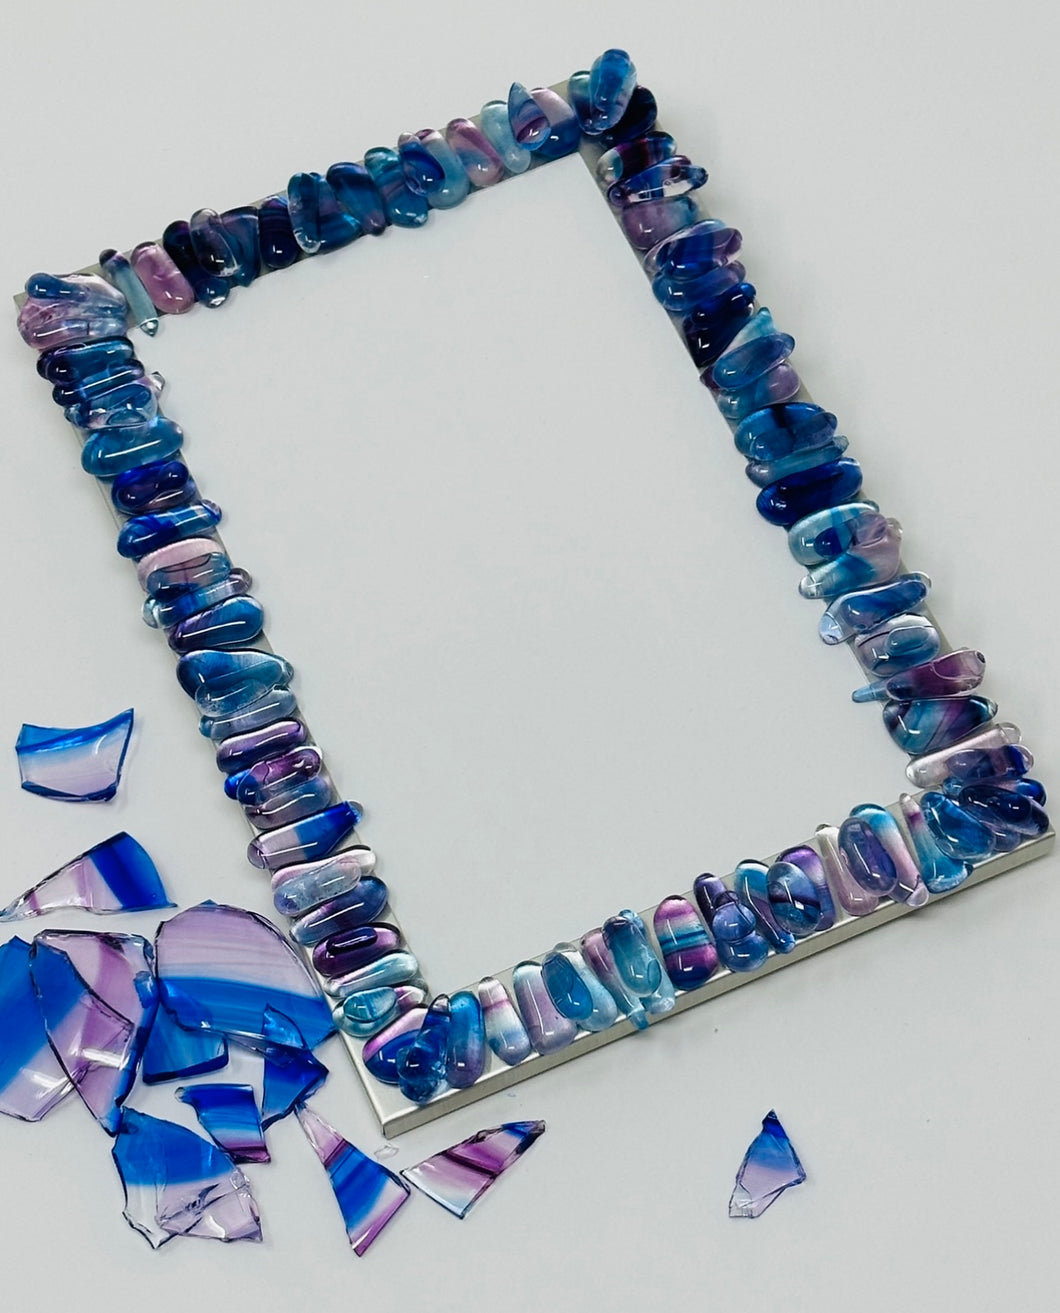 Personalized Picture Frame Made with Your Chuppah Glass shards